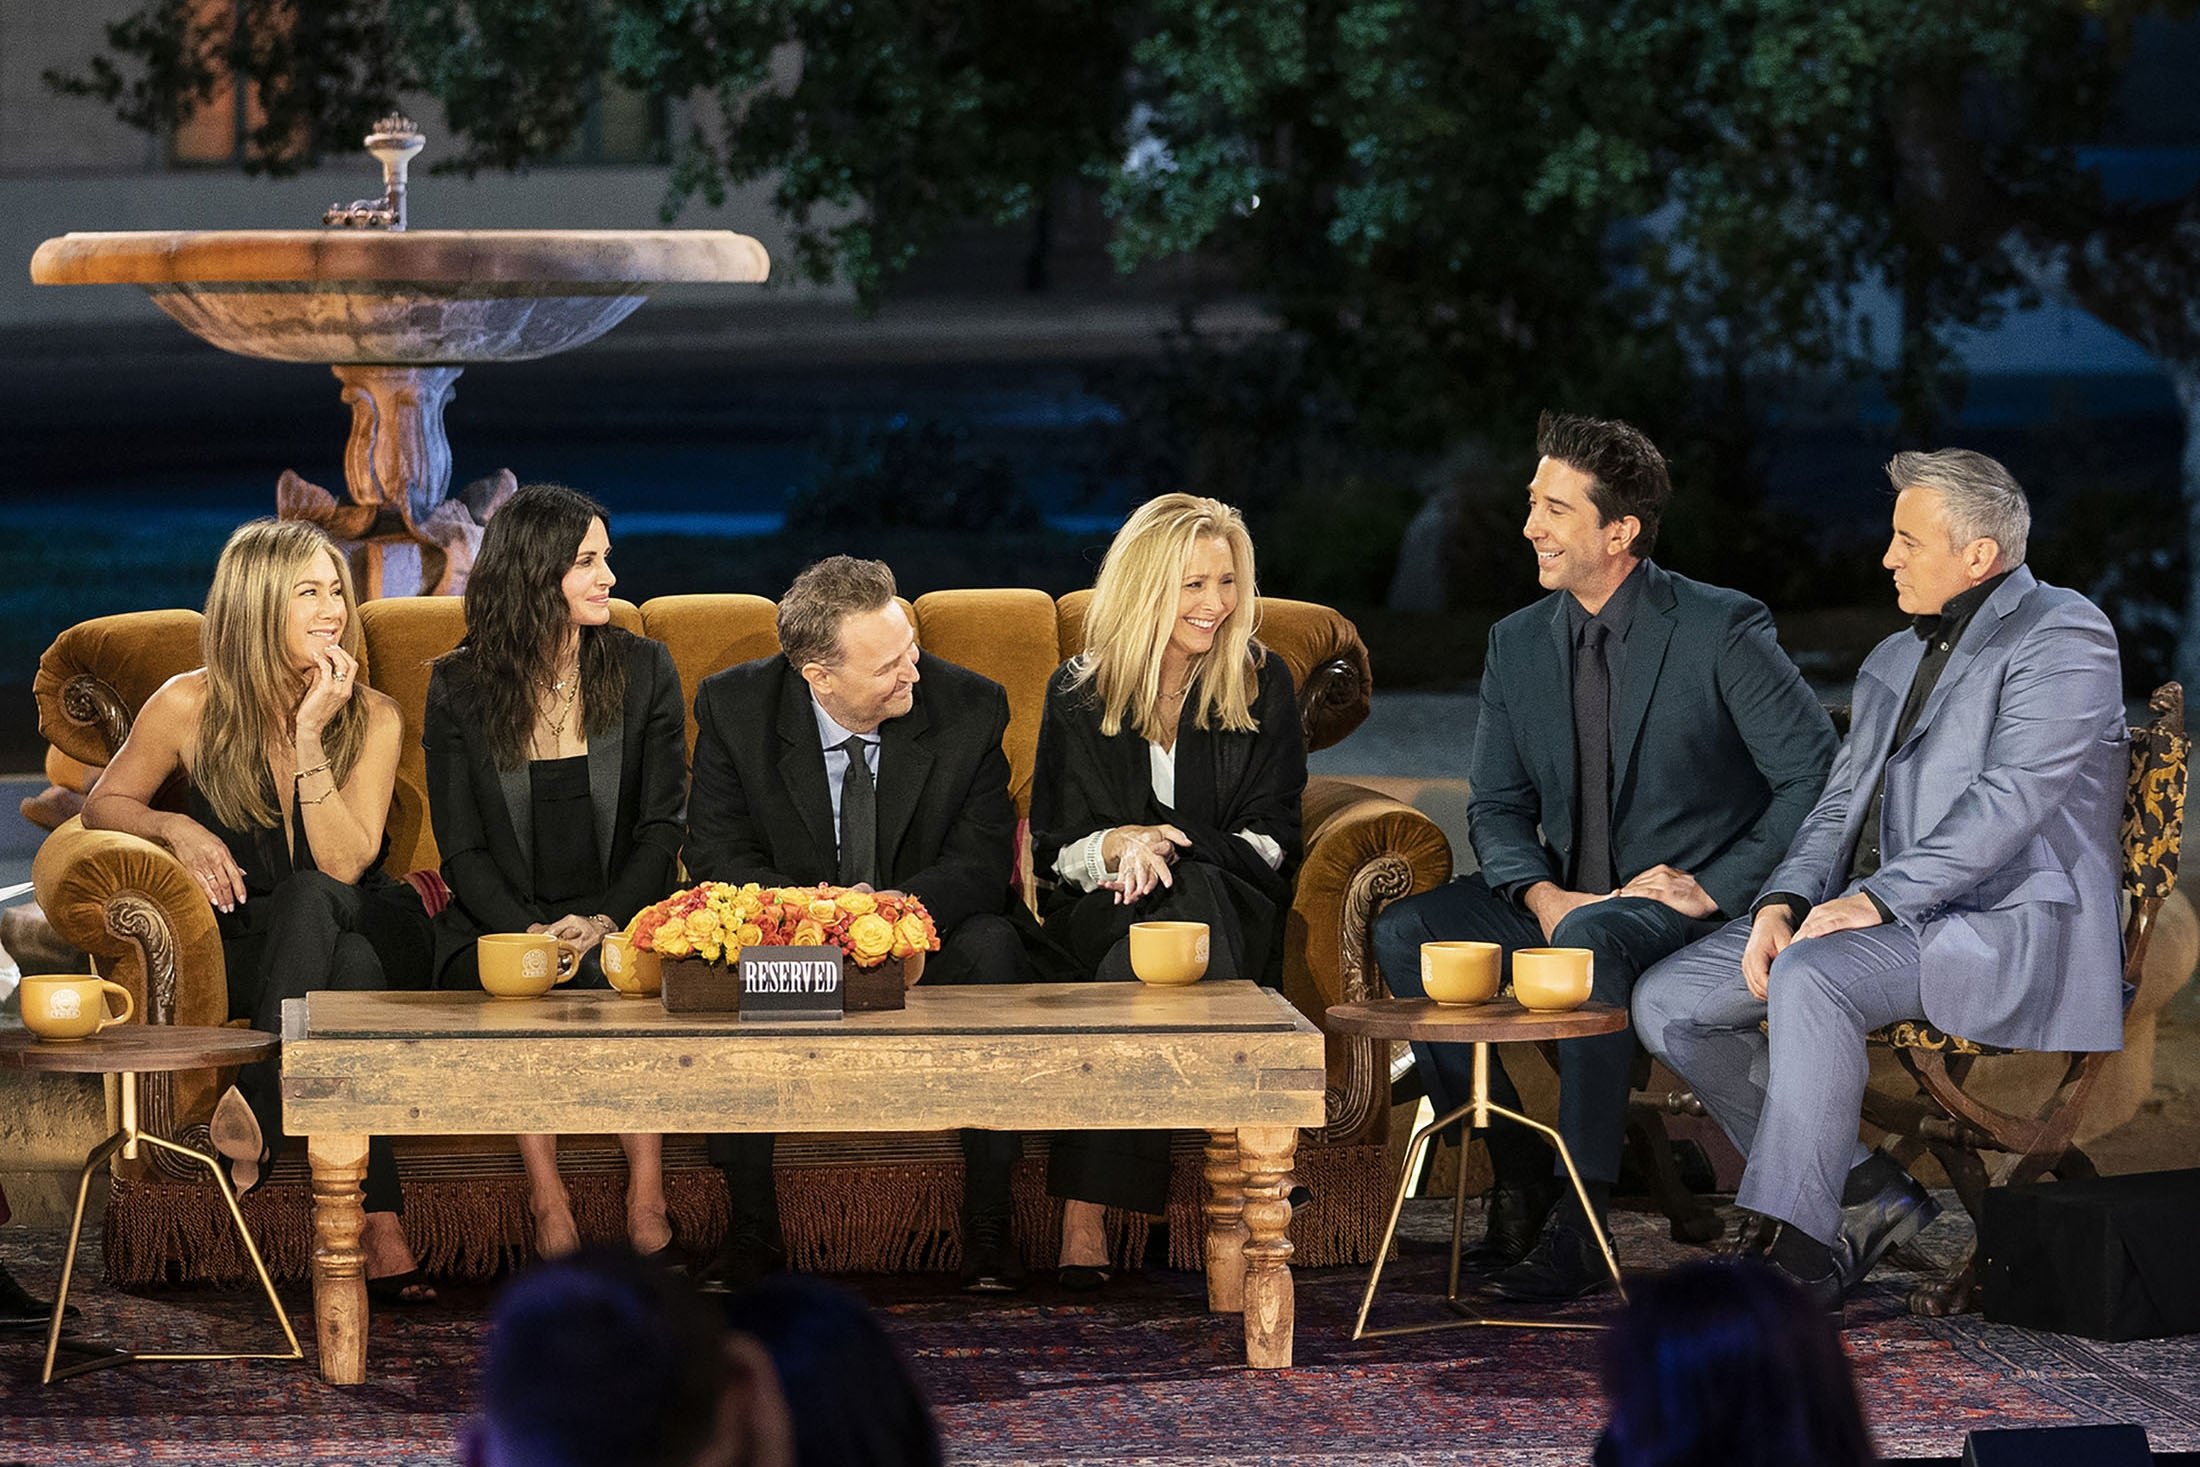 The cast of “Friends,” from left to right, Jennifer Aniston, Courteney Cox, Matthew Perry, Lisa Kudrow, David Schwimmer and Matt Leblanc, during a taping of the special “Friends: The Reunion.” (HBO Max via AP)